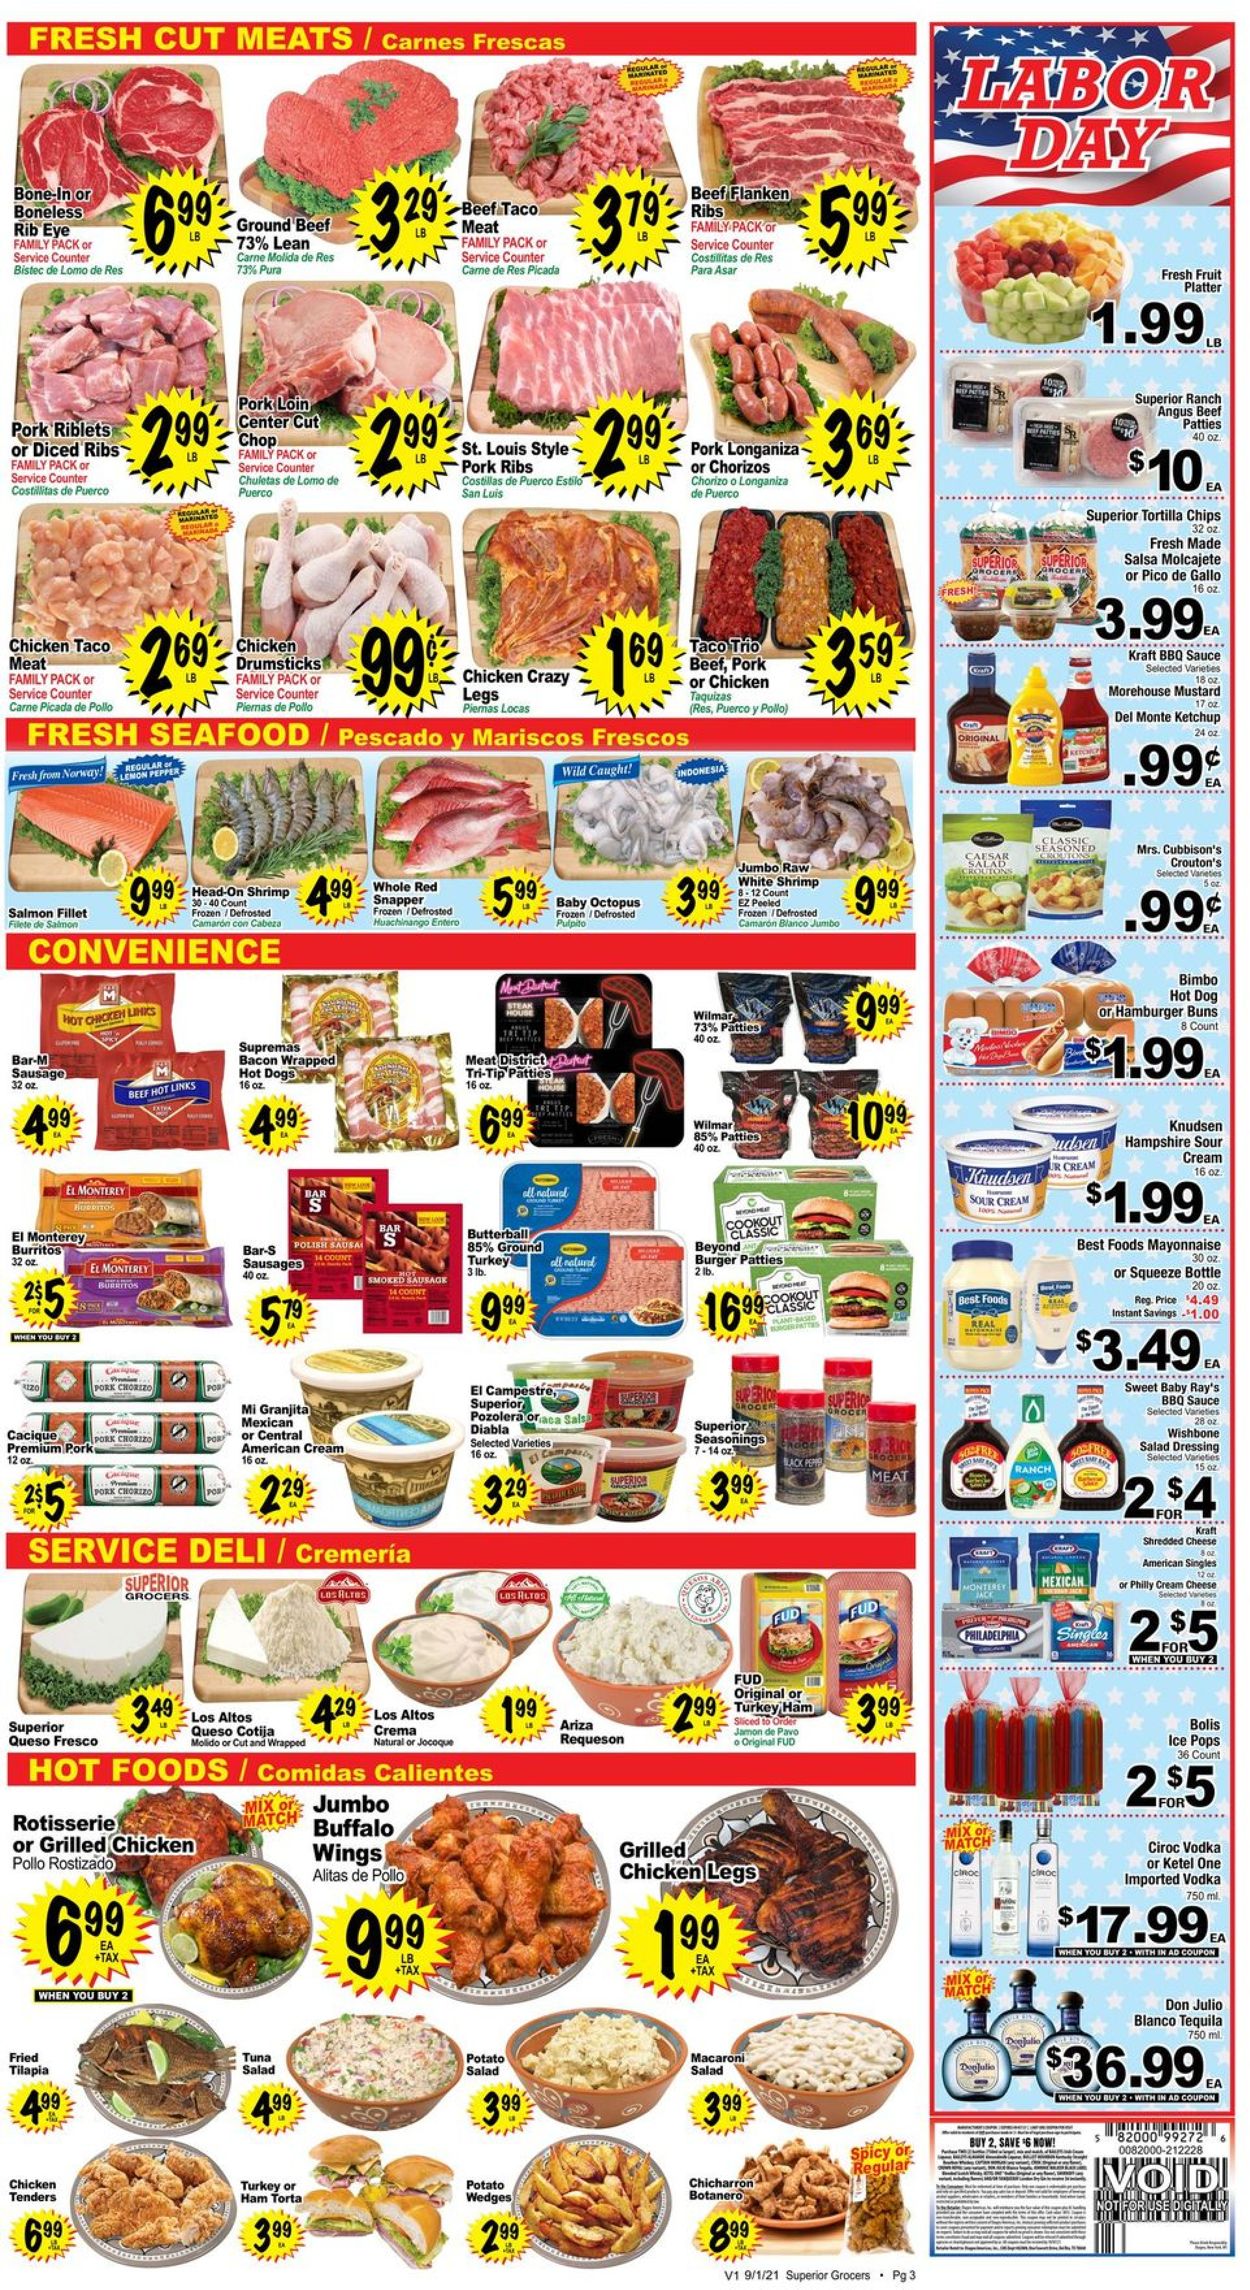 Catalogue Superior Grocers from 09/01/2021